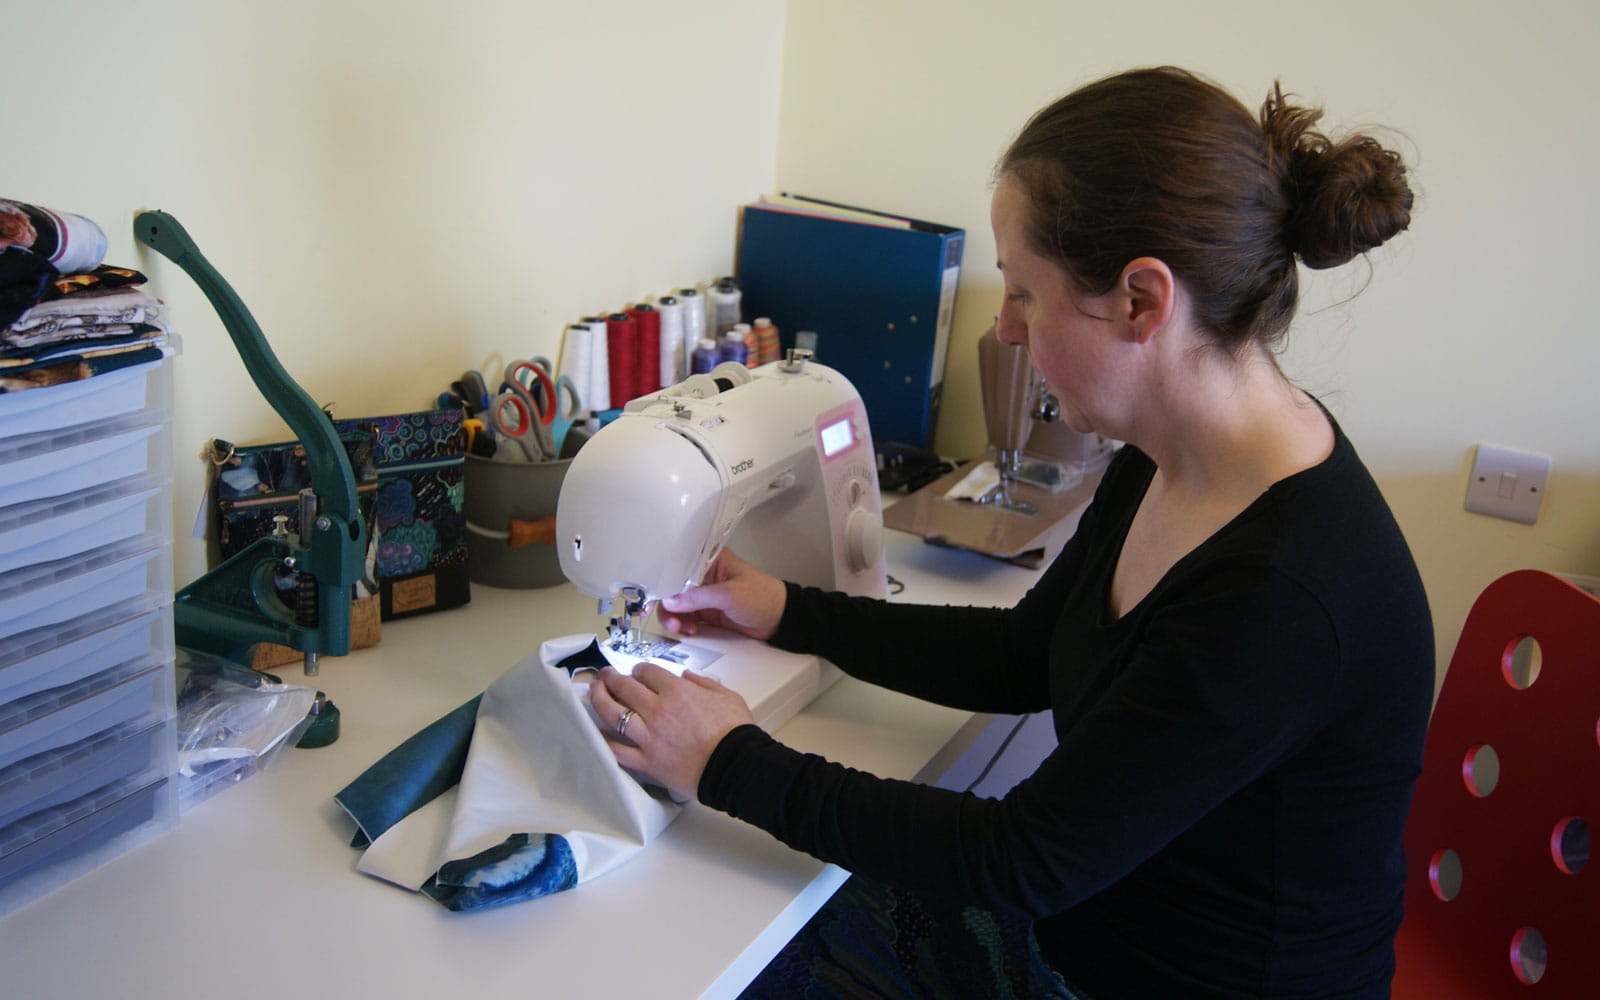 Eleanor sewing on her Innov-is 10a Brother sewing machine